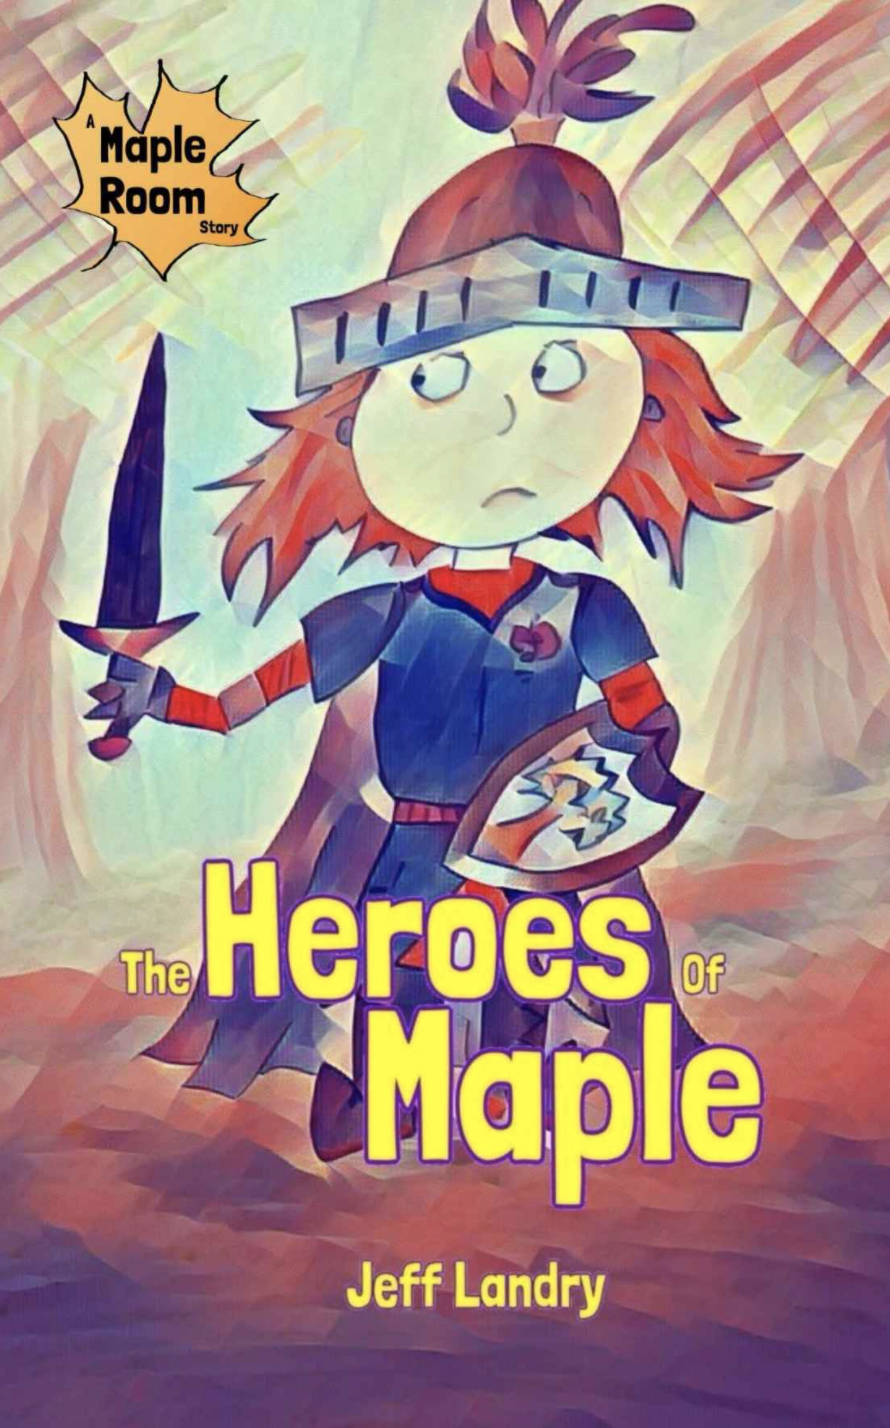 The cover of one of Landry's books, Heroes of Maple